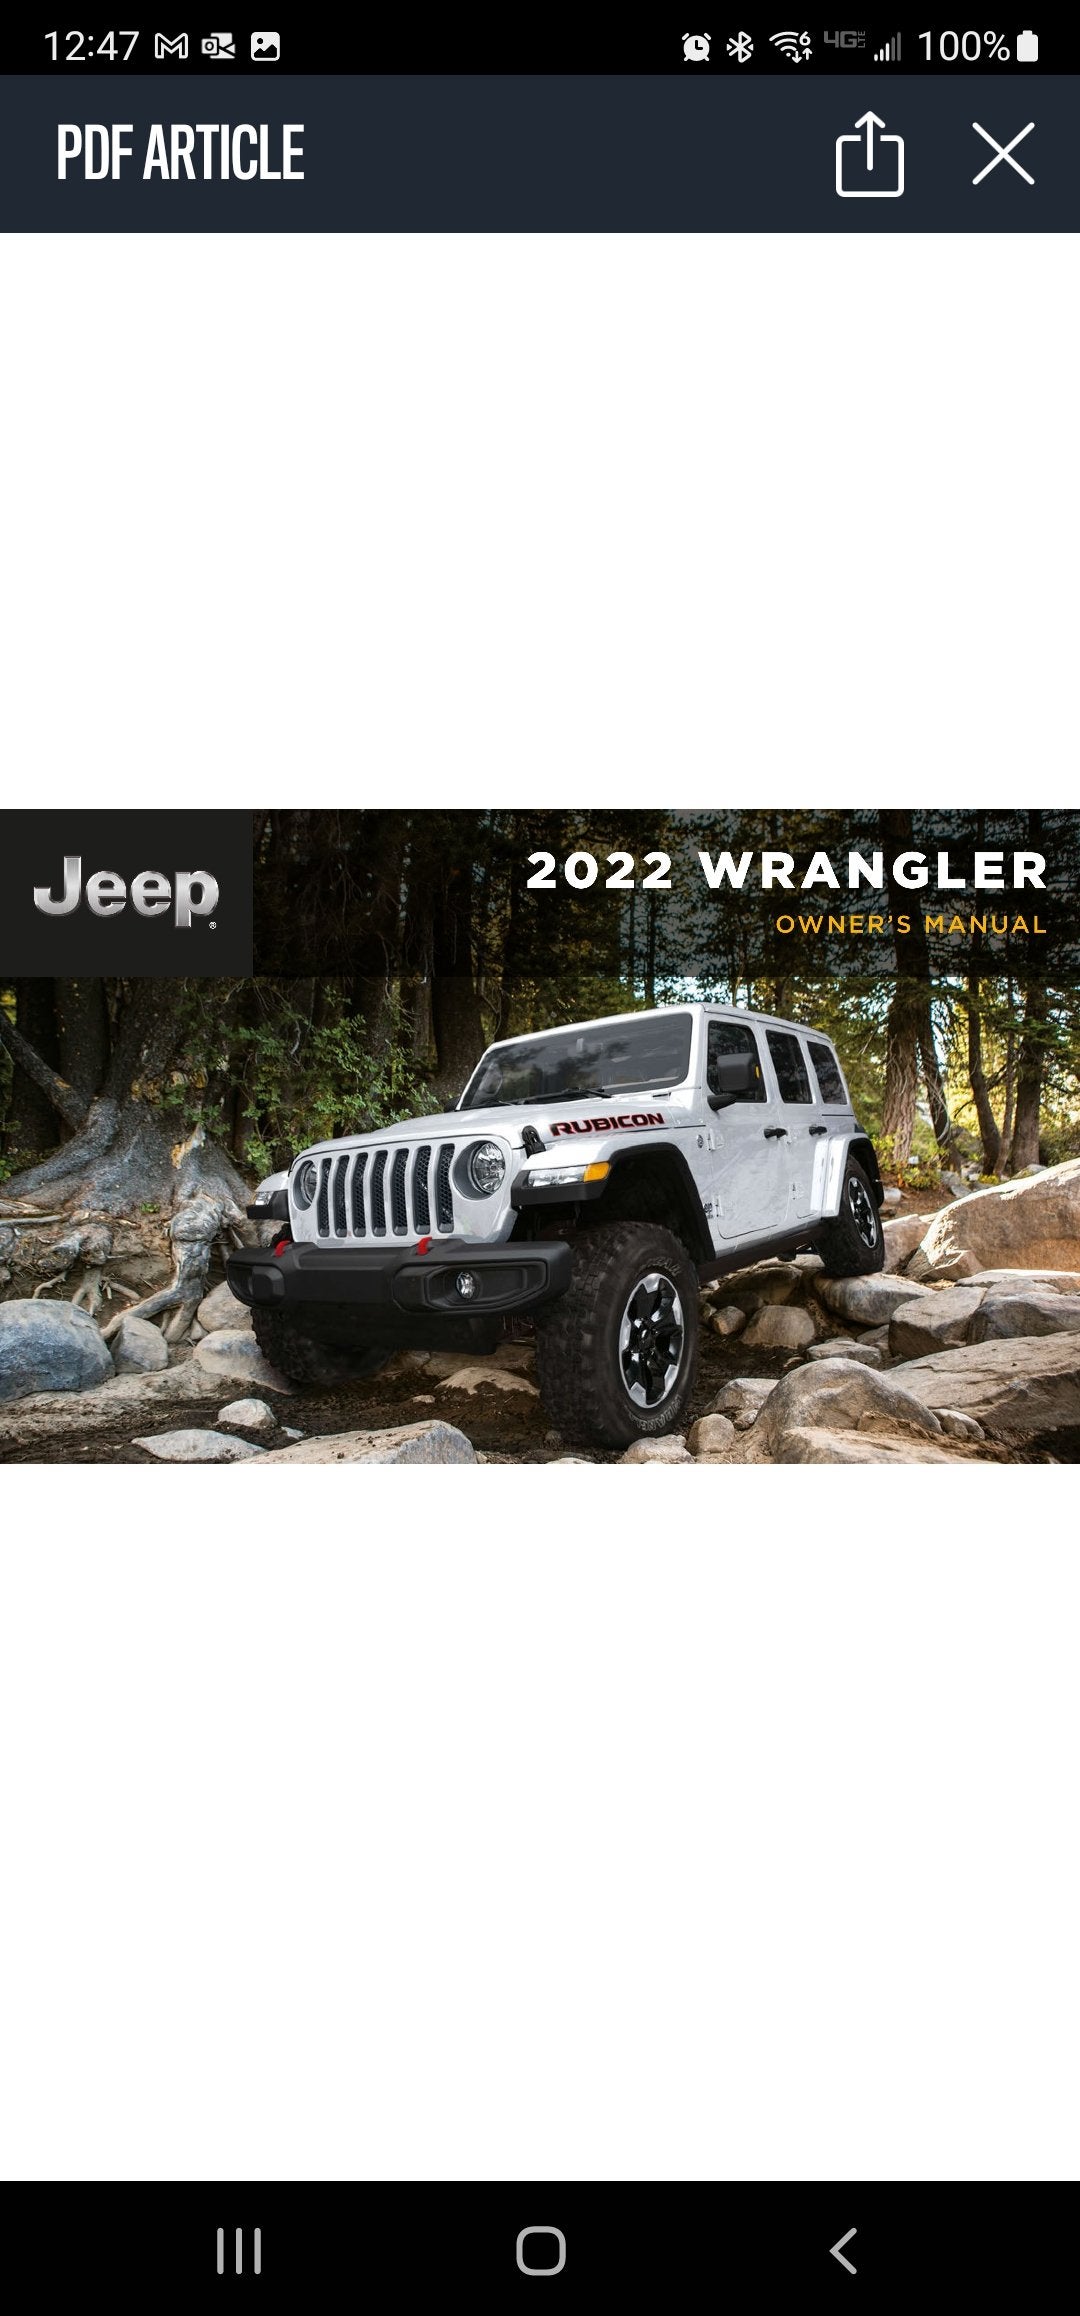 Owner's manual and service booklet | Jeep Wrangler 4xe Forum